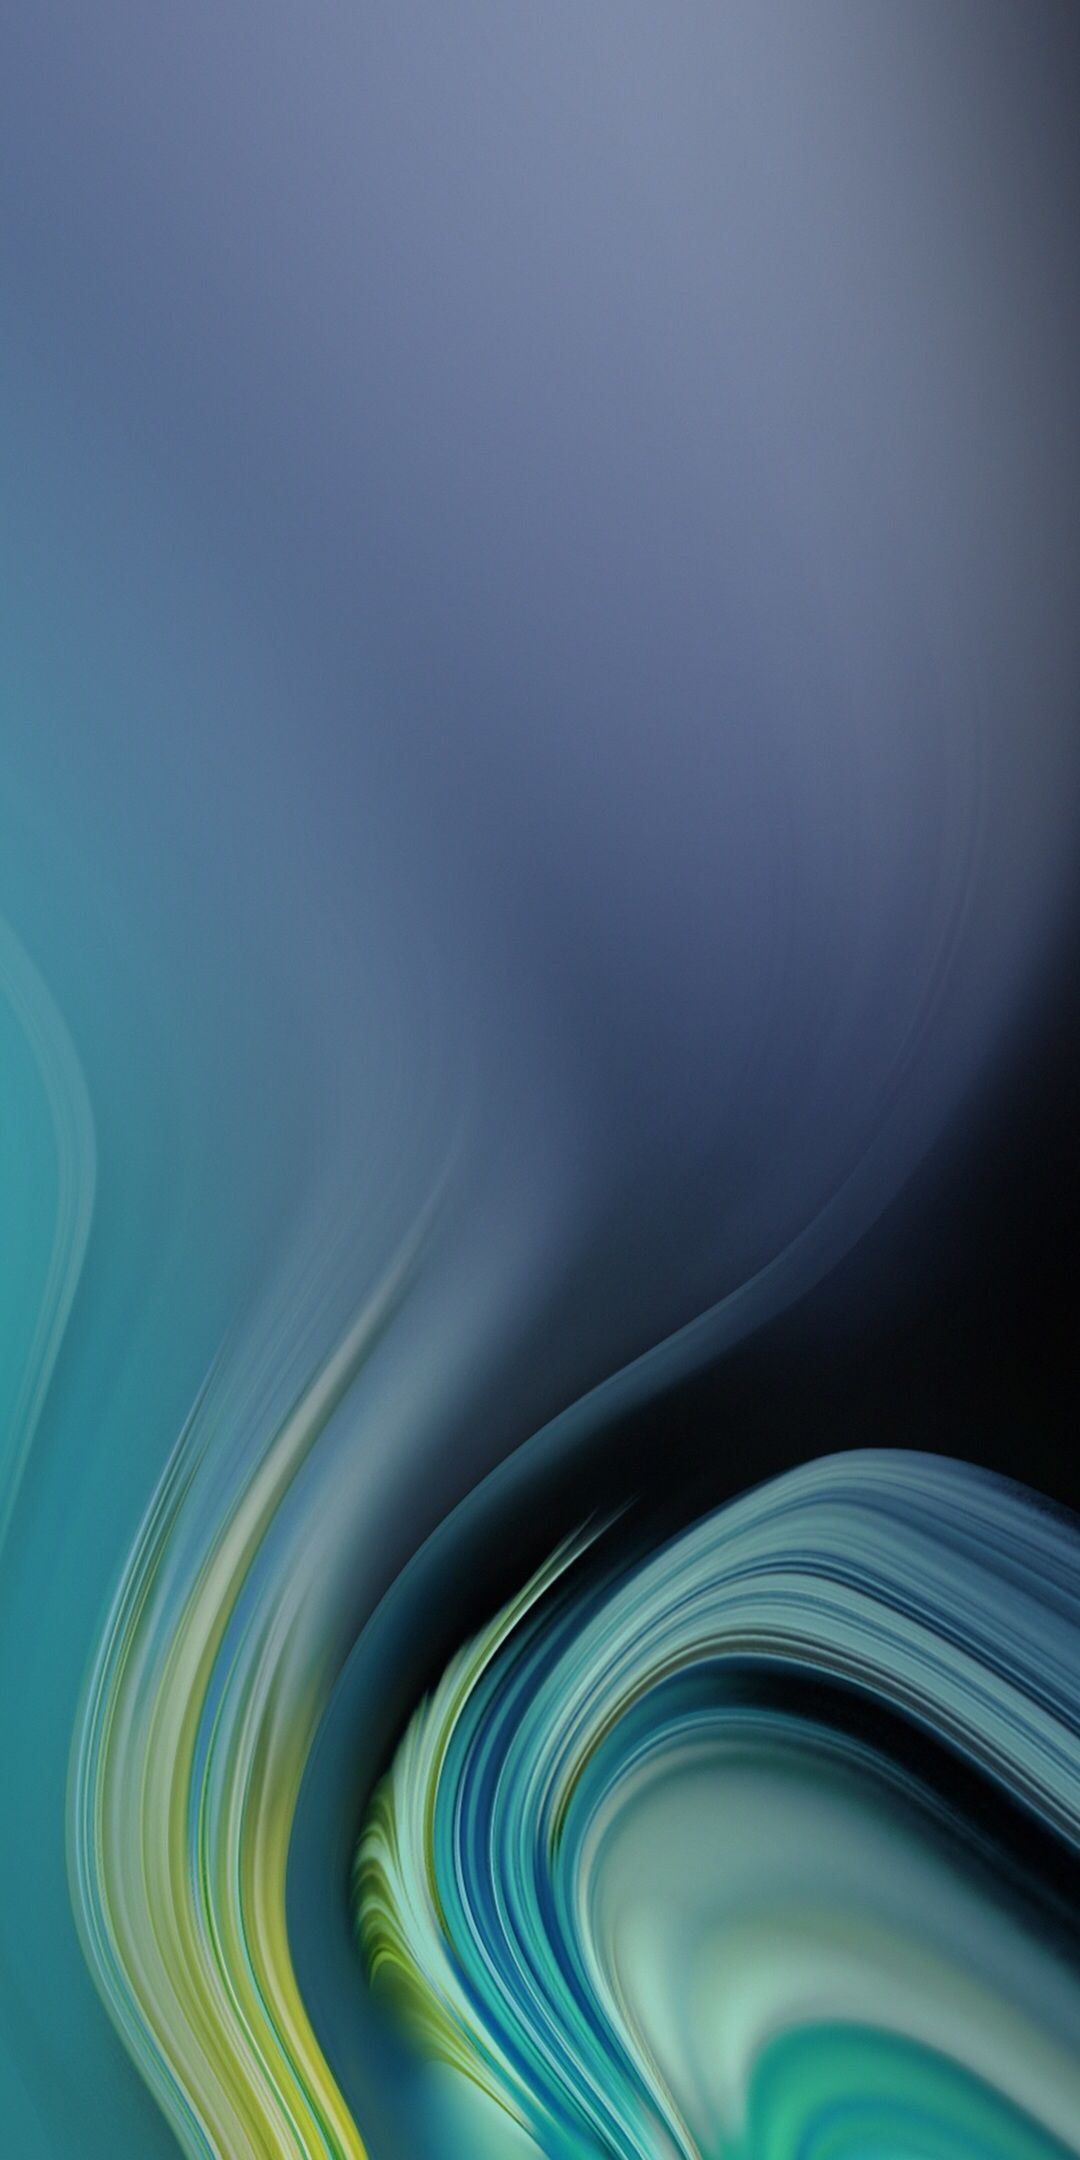 Galaxy 8K Wallpaper For Mobile - Samsung Galaxy S20 FE Wallpapers Leak